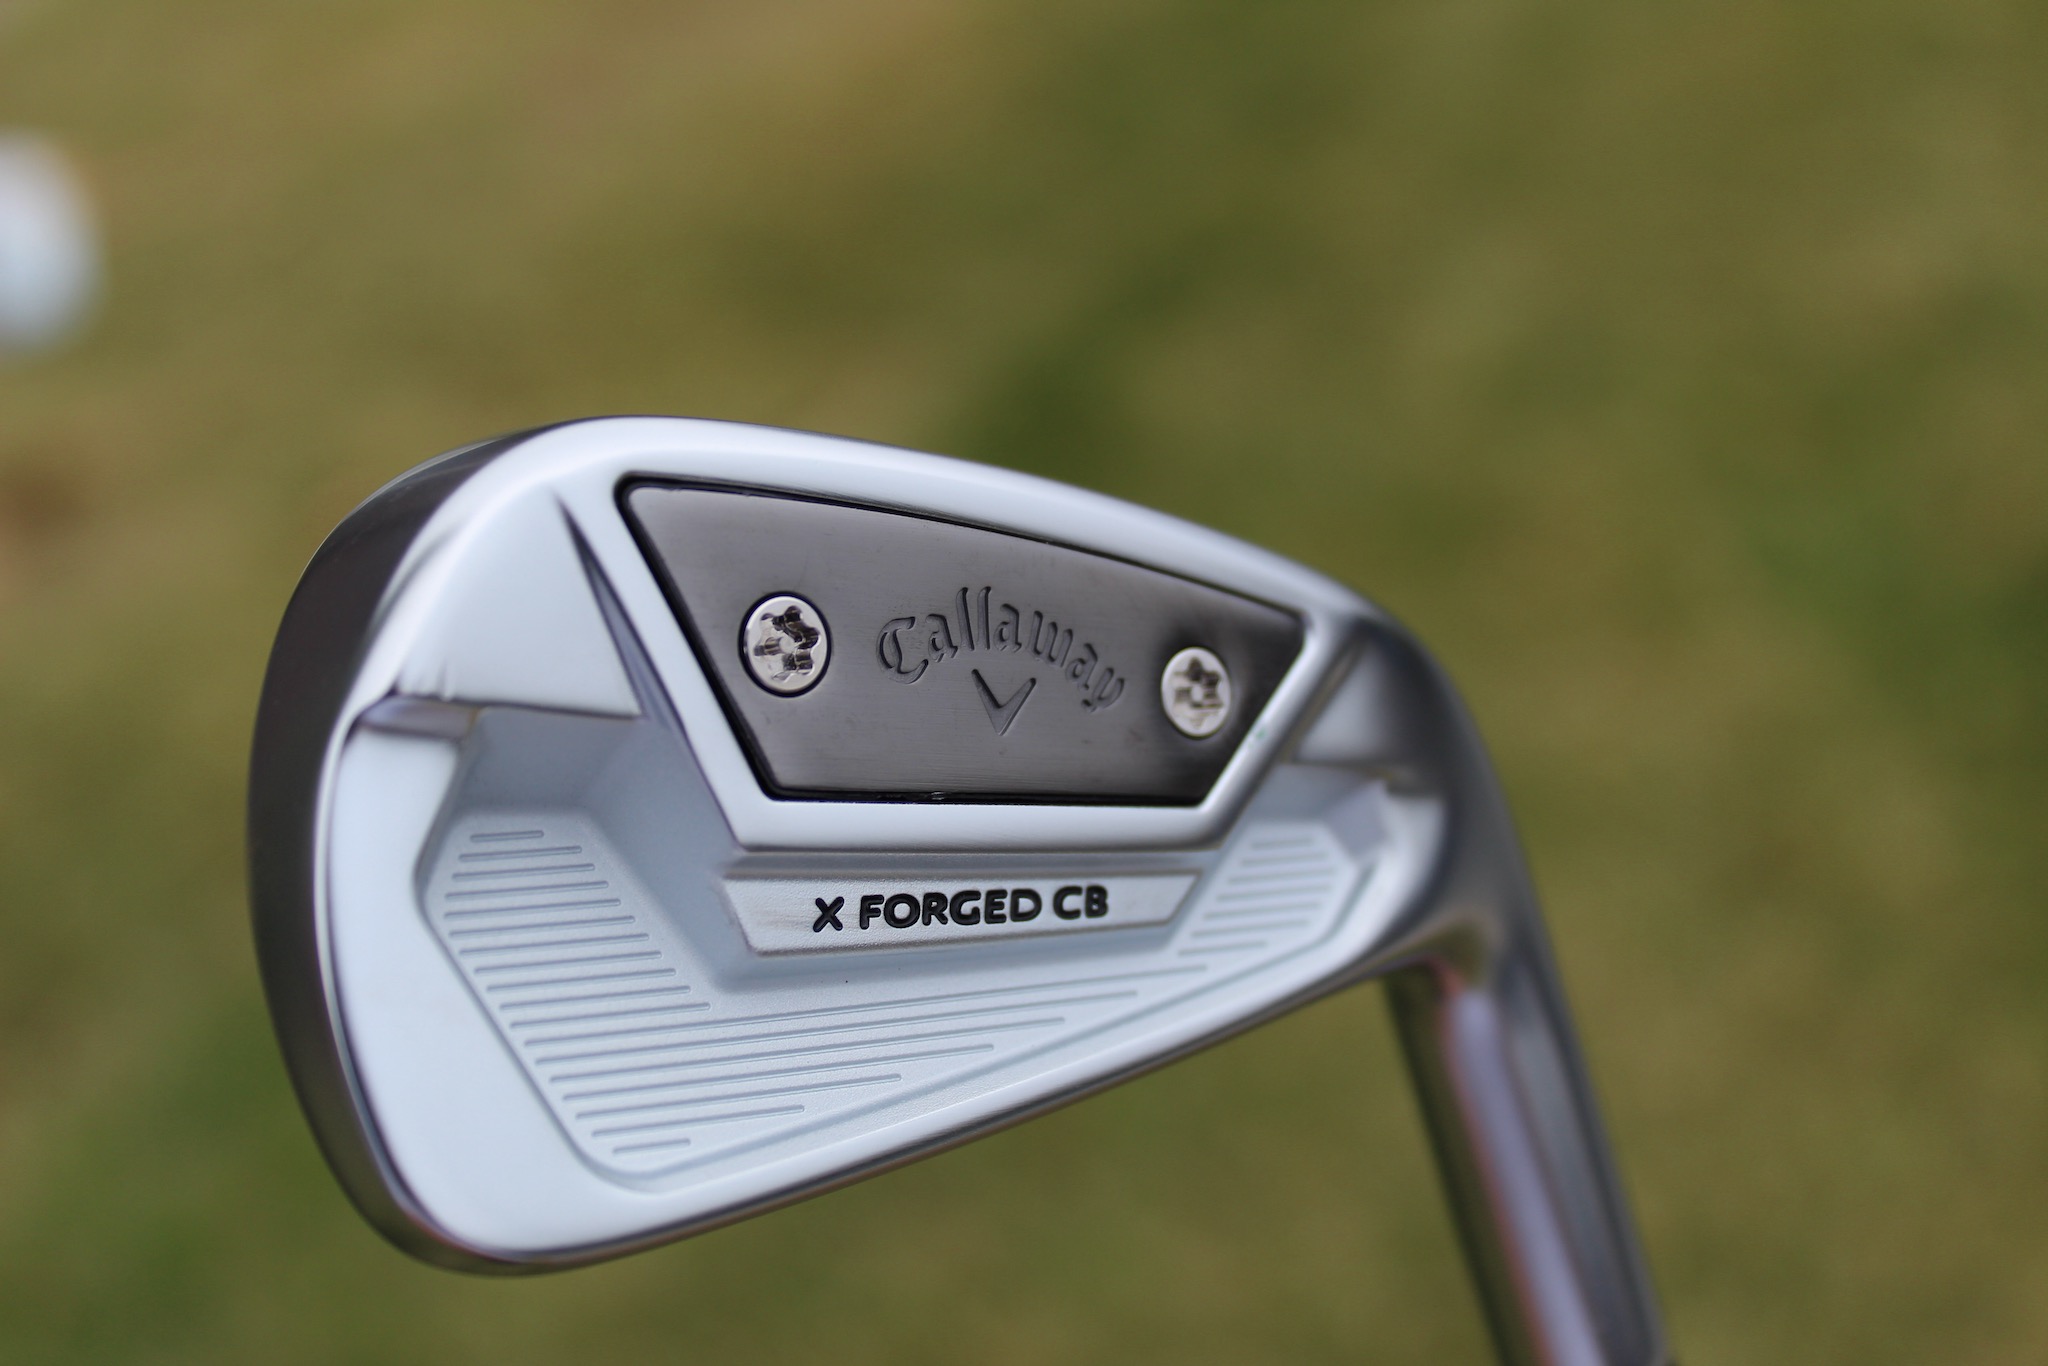 2021 Callaway X Forged CB, UT, and Apex MB irons launched – GolfWRX